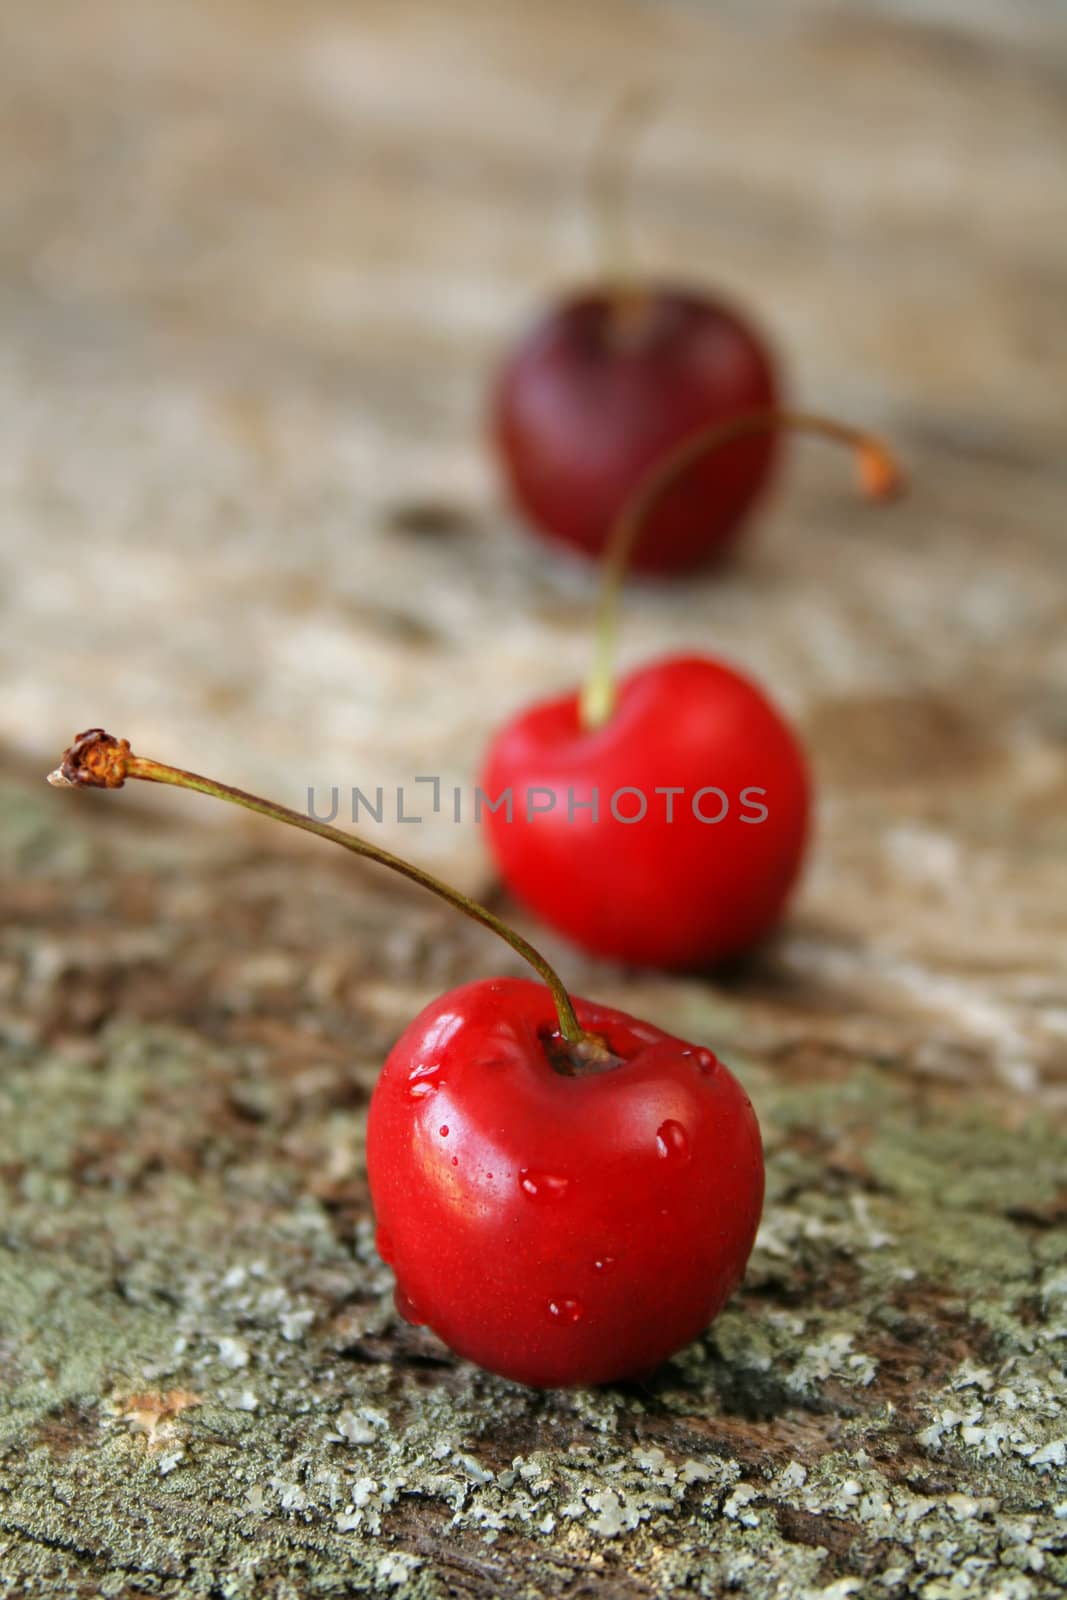 three ripe cherries lined up on a piece of wood.  Used a shallow DOF